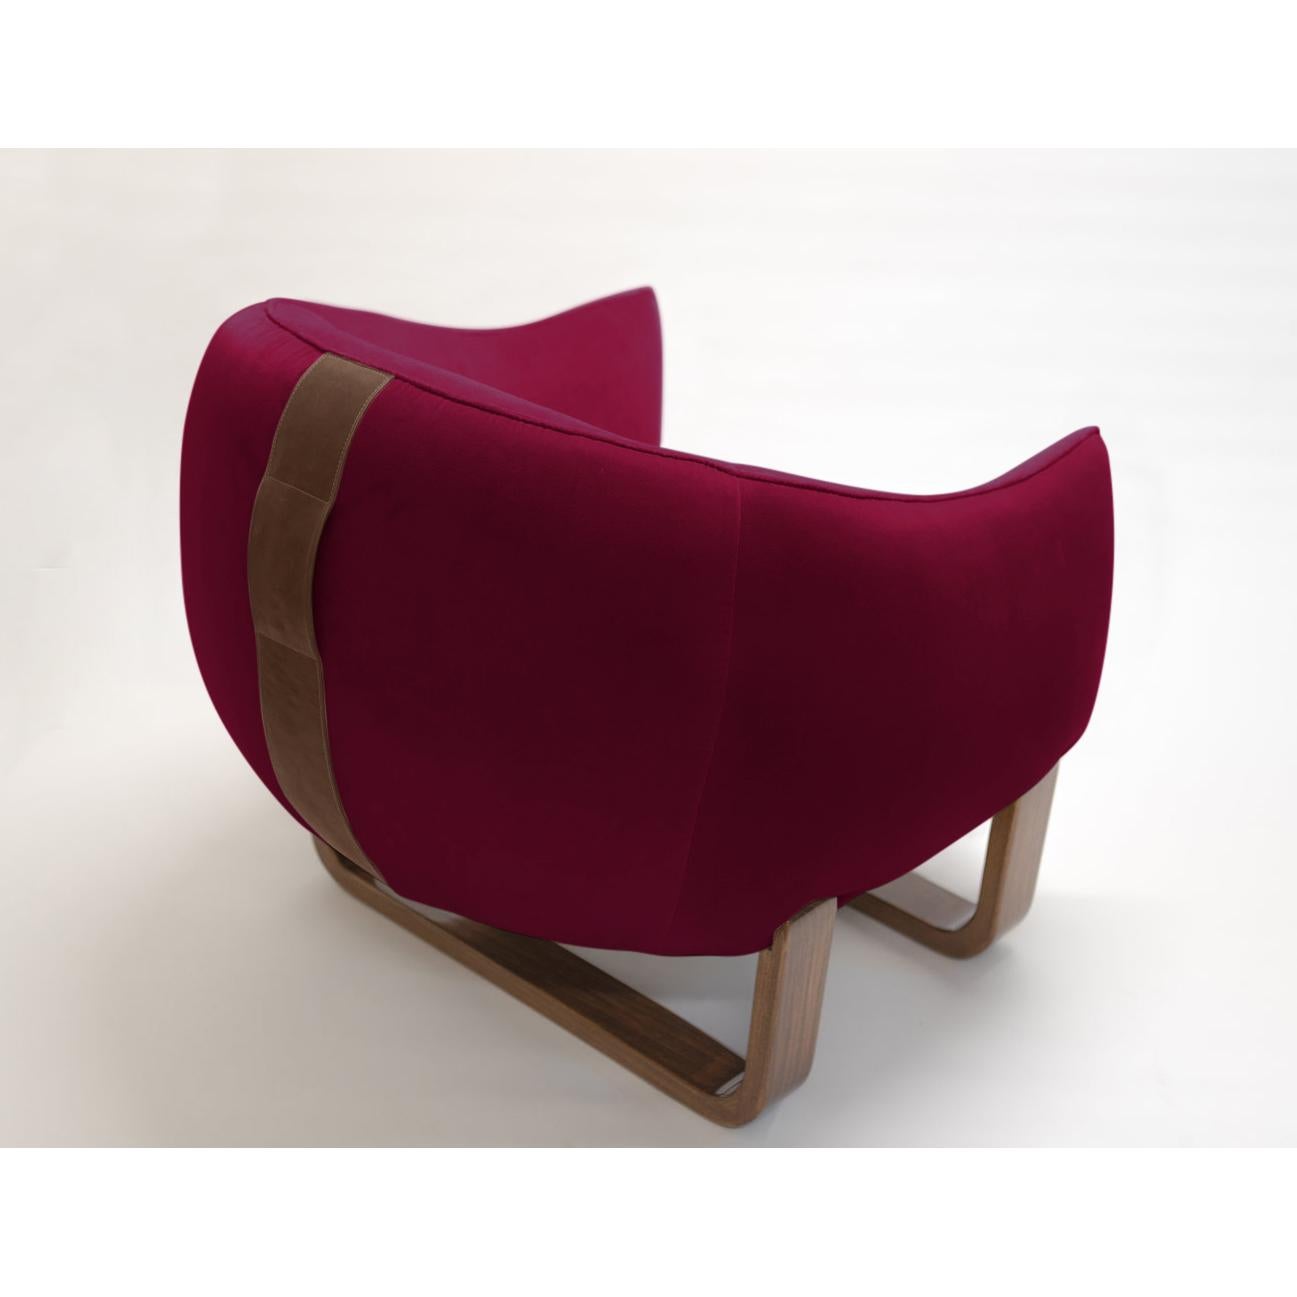 The Milo armchair features twin bentwood bases and legs in luxurious lacquer and varnished finishes, while The Milo Bean has leather accent handles for easy carrying?. The colorful, curvy duo designed by Marie Burgos can be used together with The